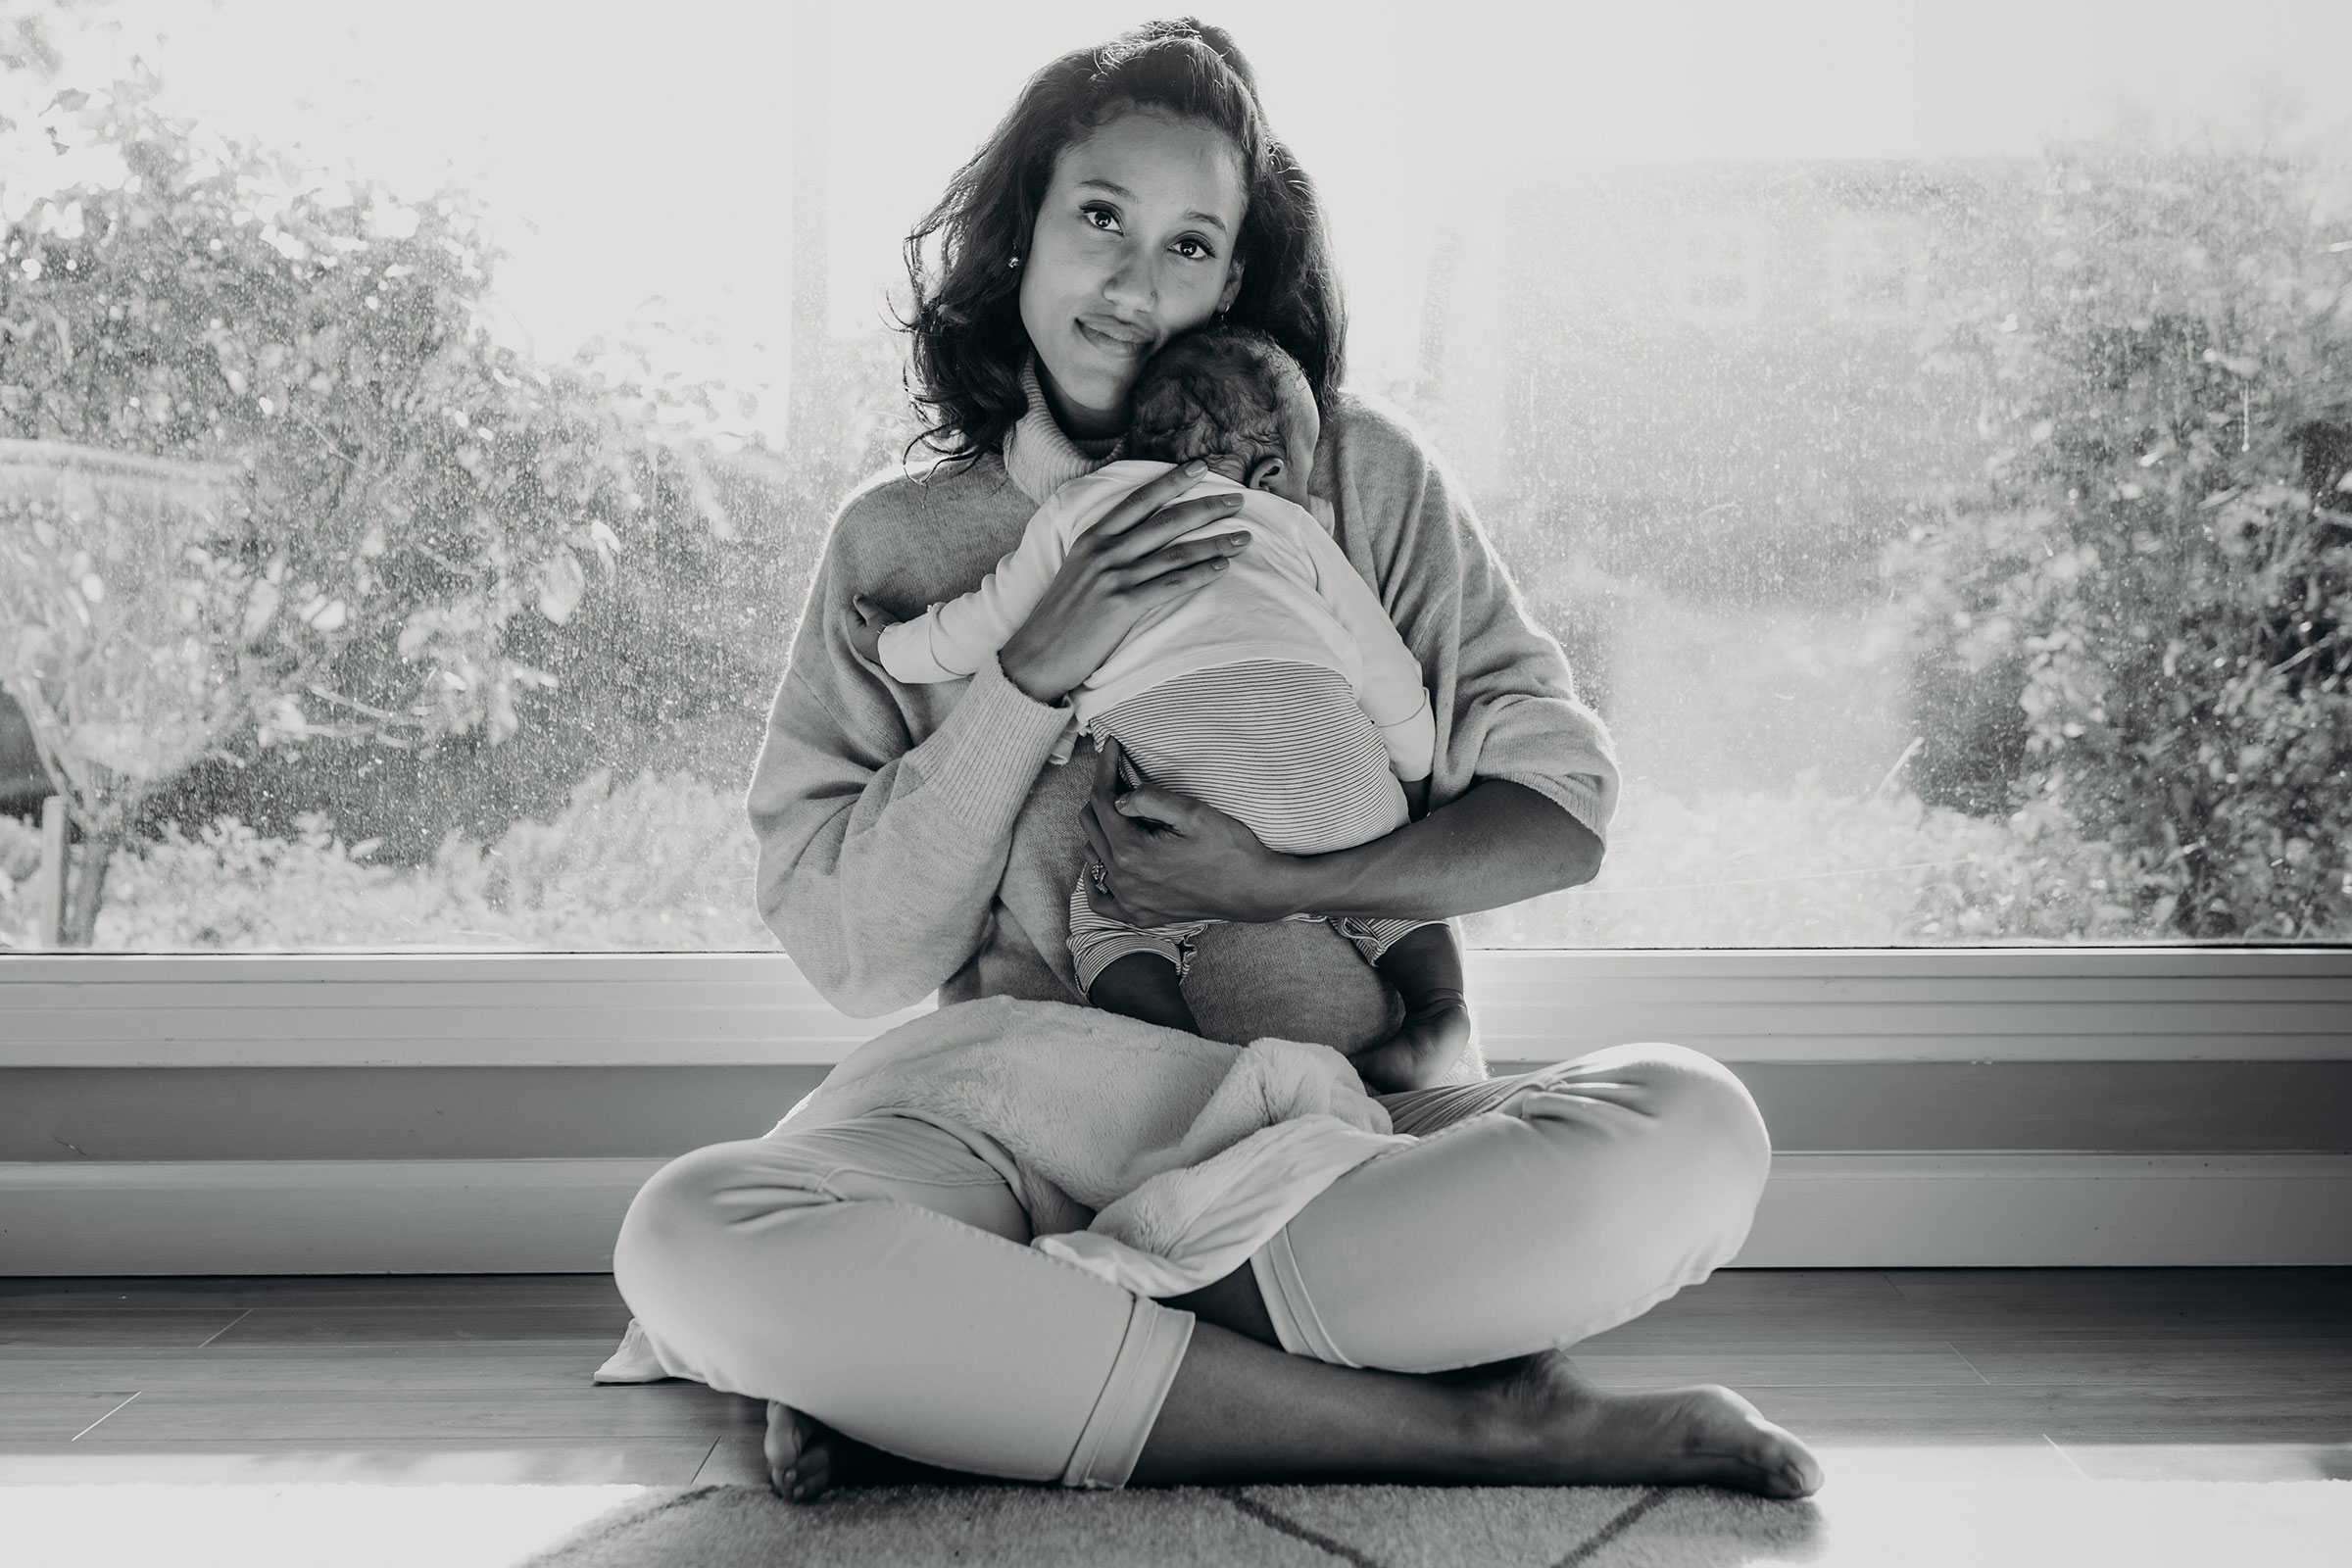 Anna Malaika Tubbs and her son. (Photograph by Shannon Lea Rock, Owner of Preserve Studio)